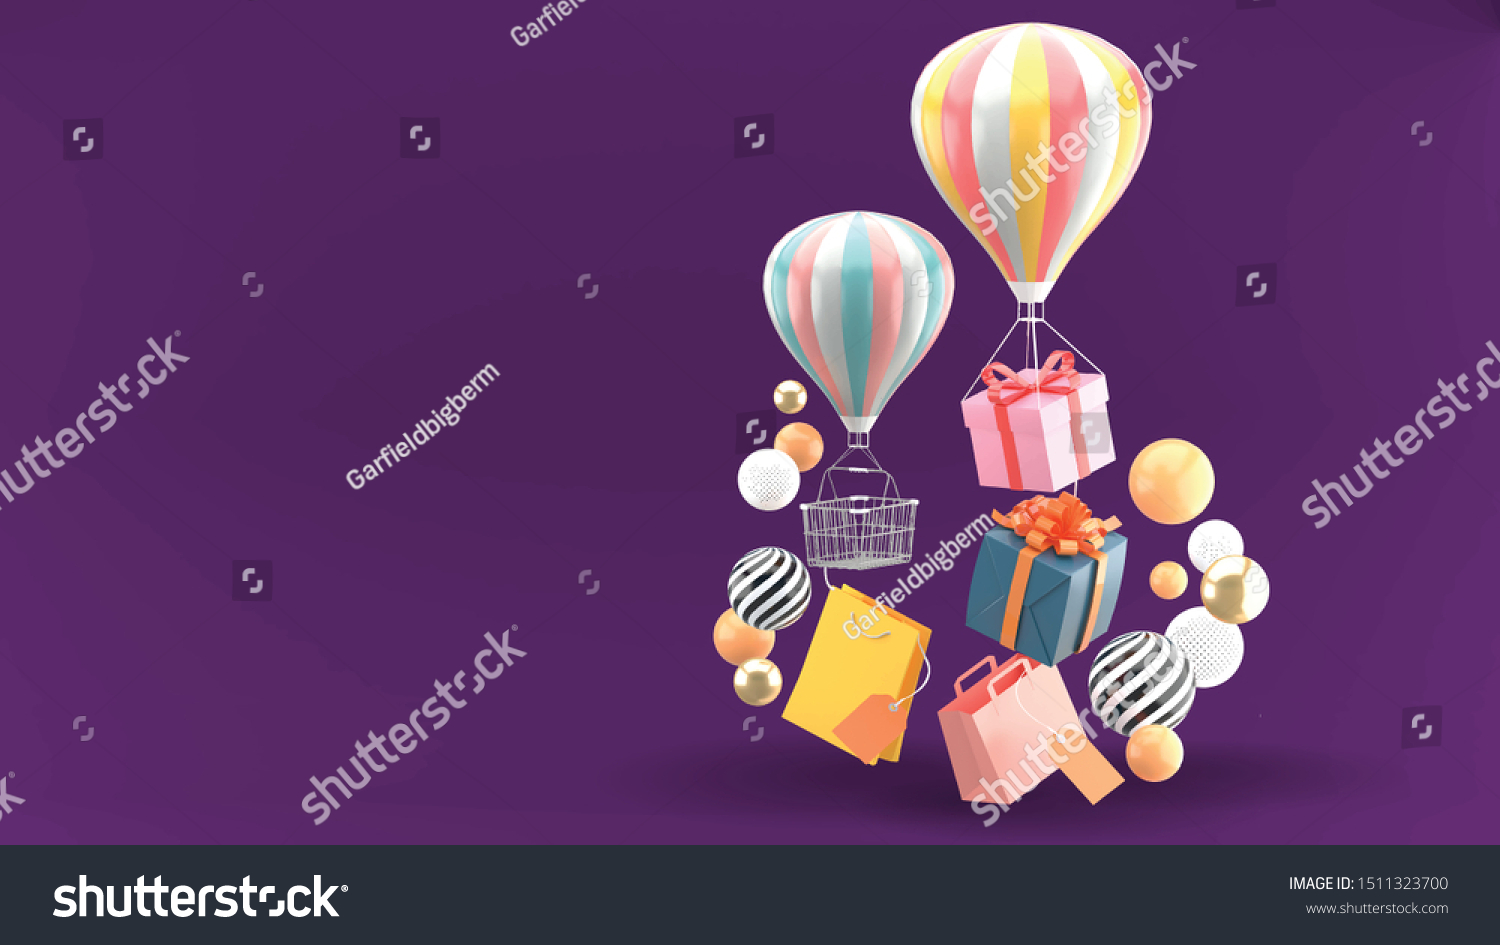 Balloon, gift box and shopping bag surrounded by colorful balls on a purple background.
 #1511323700